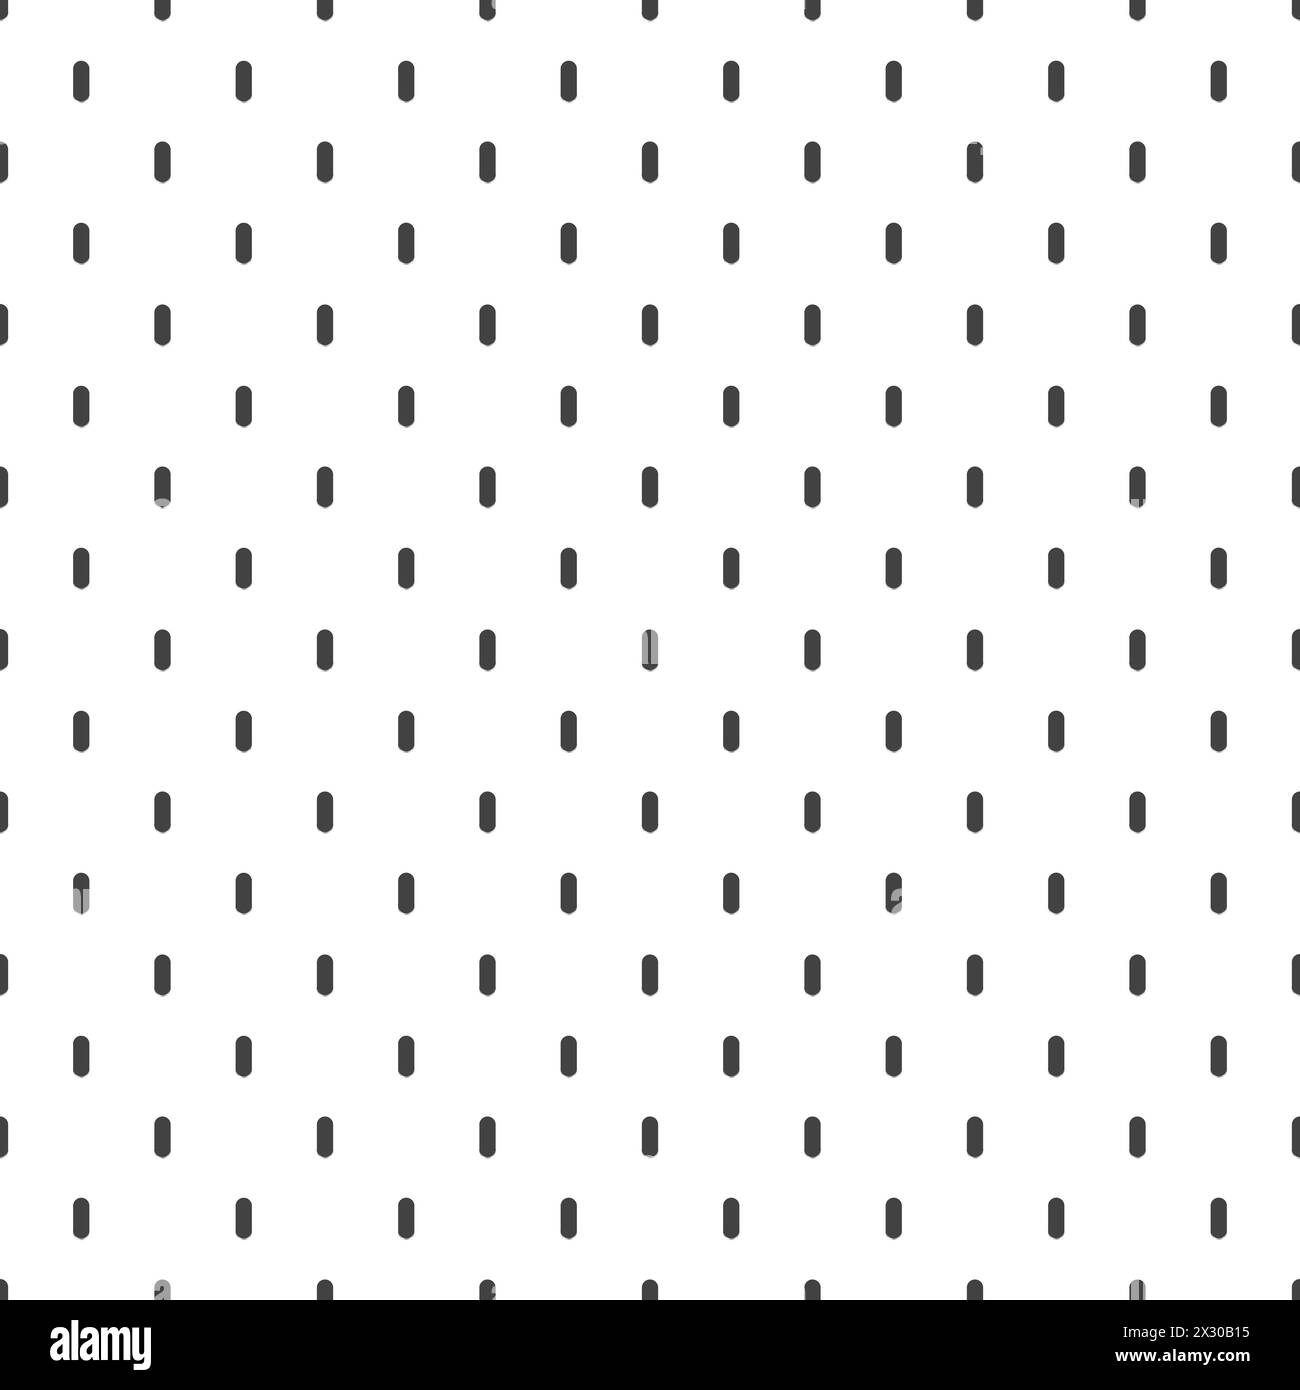 Peg board perforated texture background material with oval holes seamless pattern board vector illustration. Wall structure for working bench tools. Stock Vector